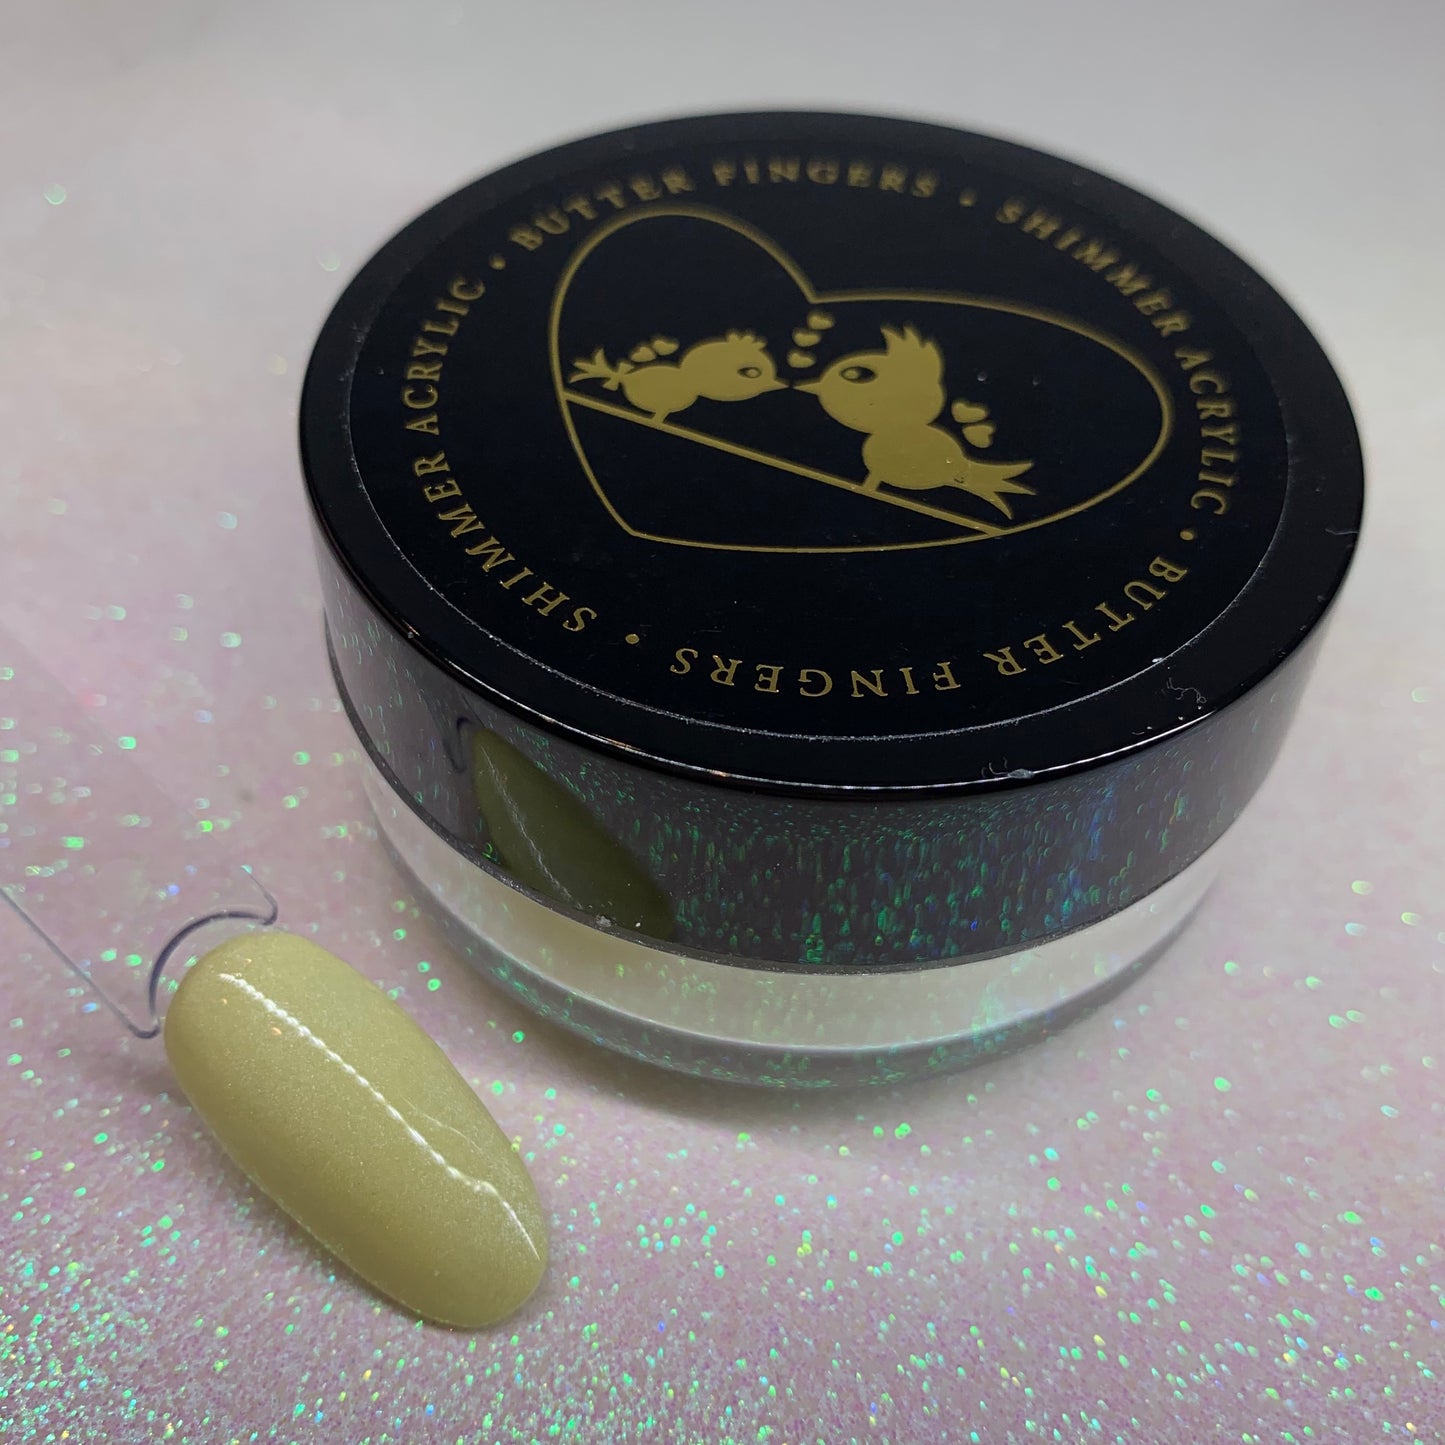 Butter Fingers Shimmer Acrylic Powder